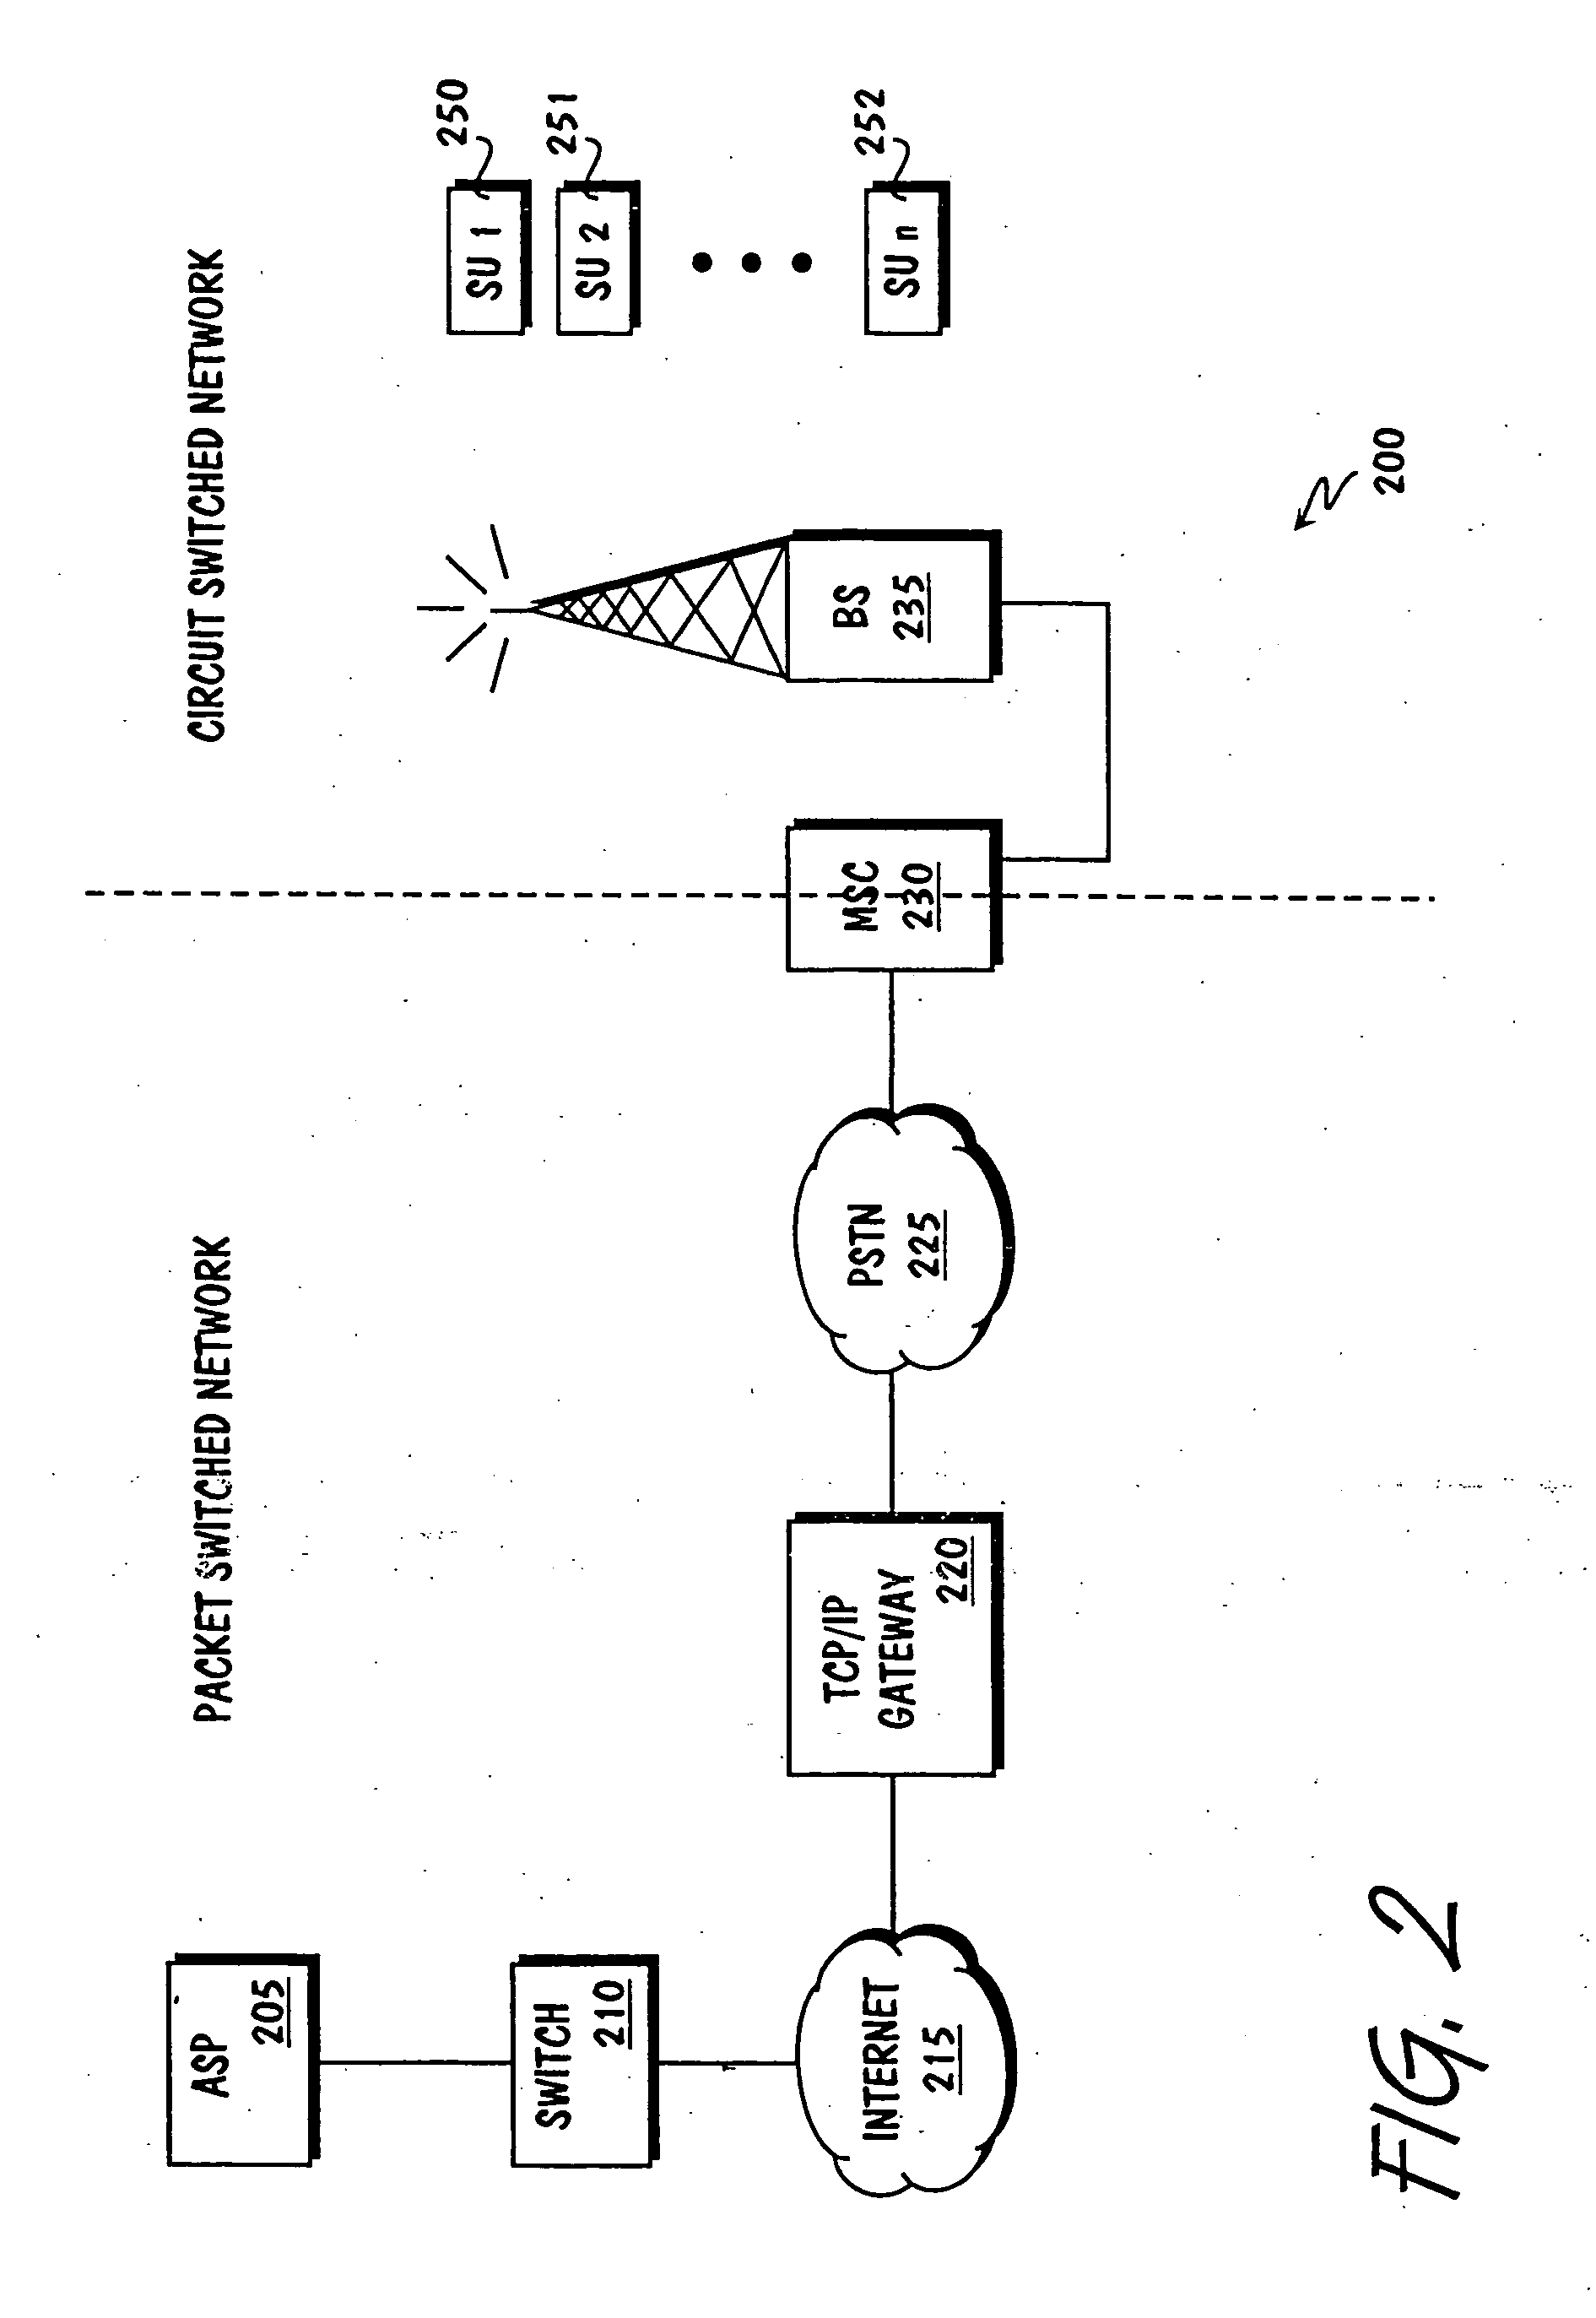 Resource allocation in a circuit switched network